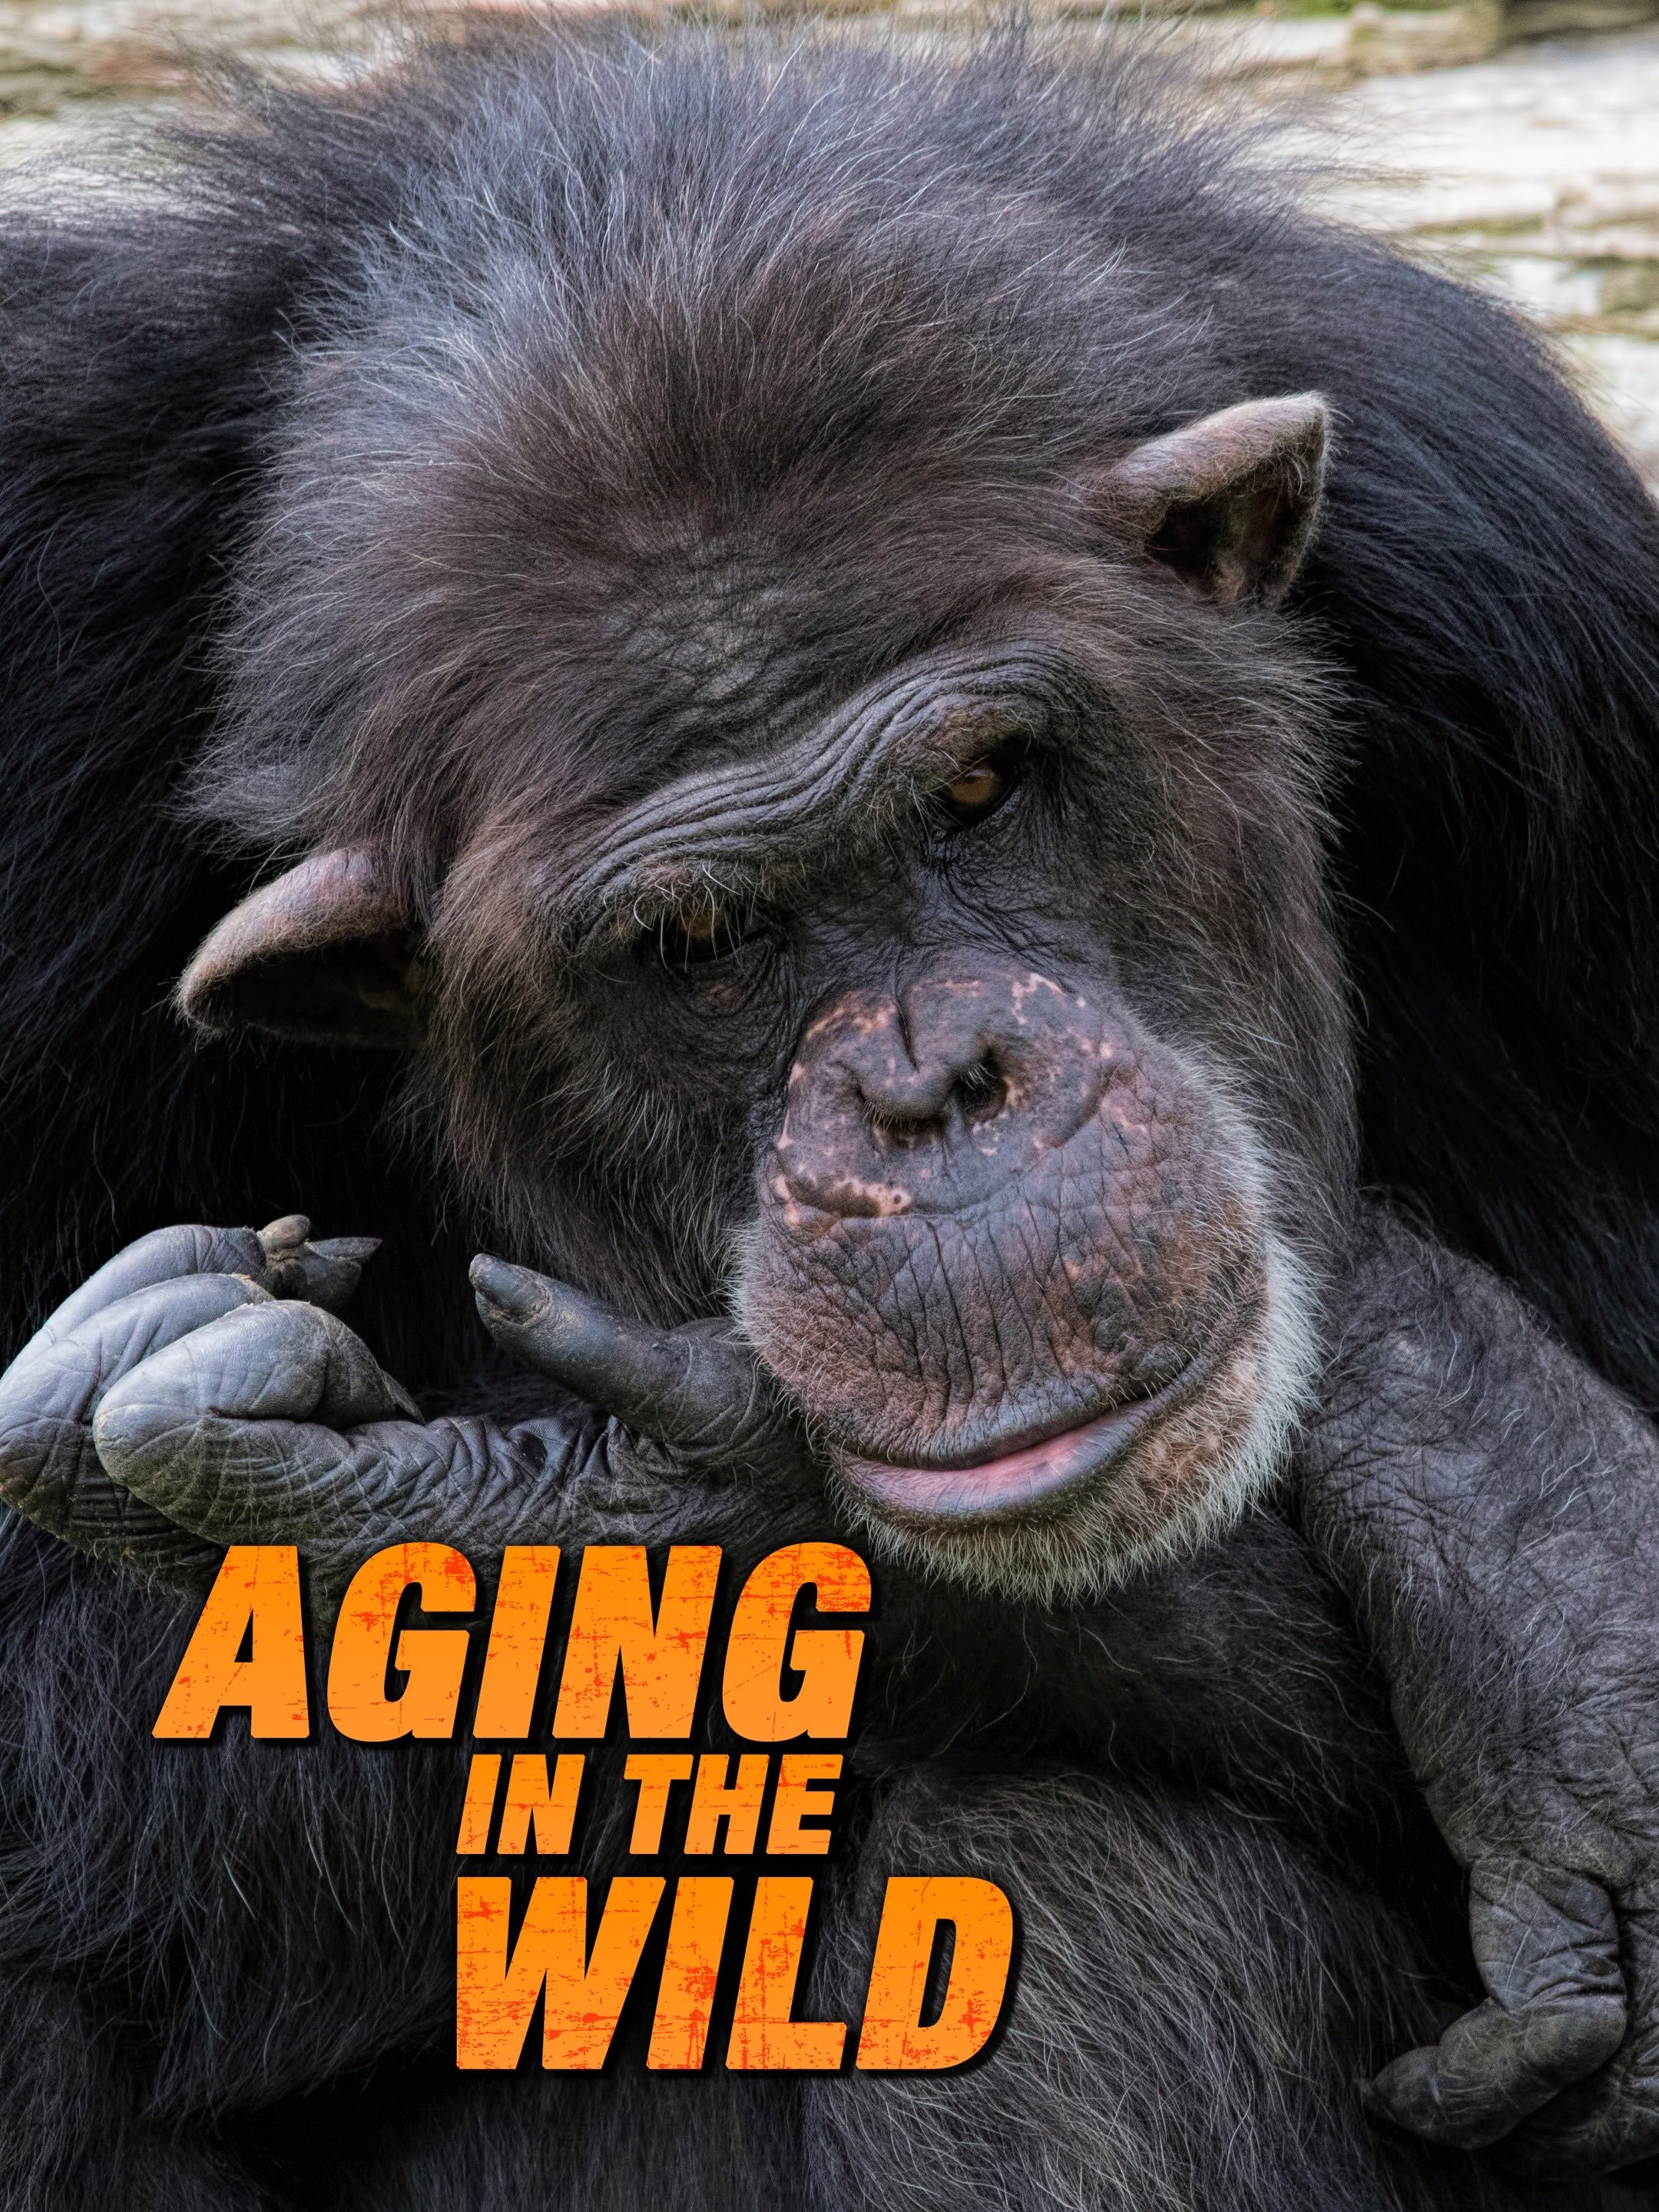 Aging in the Wild